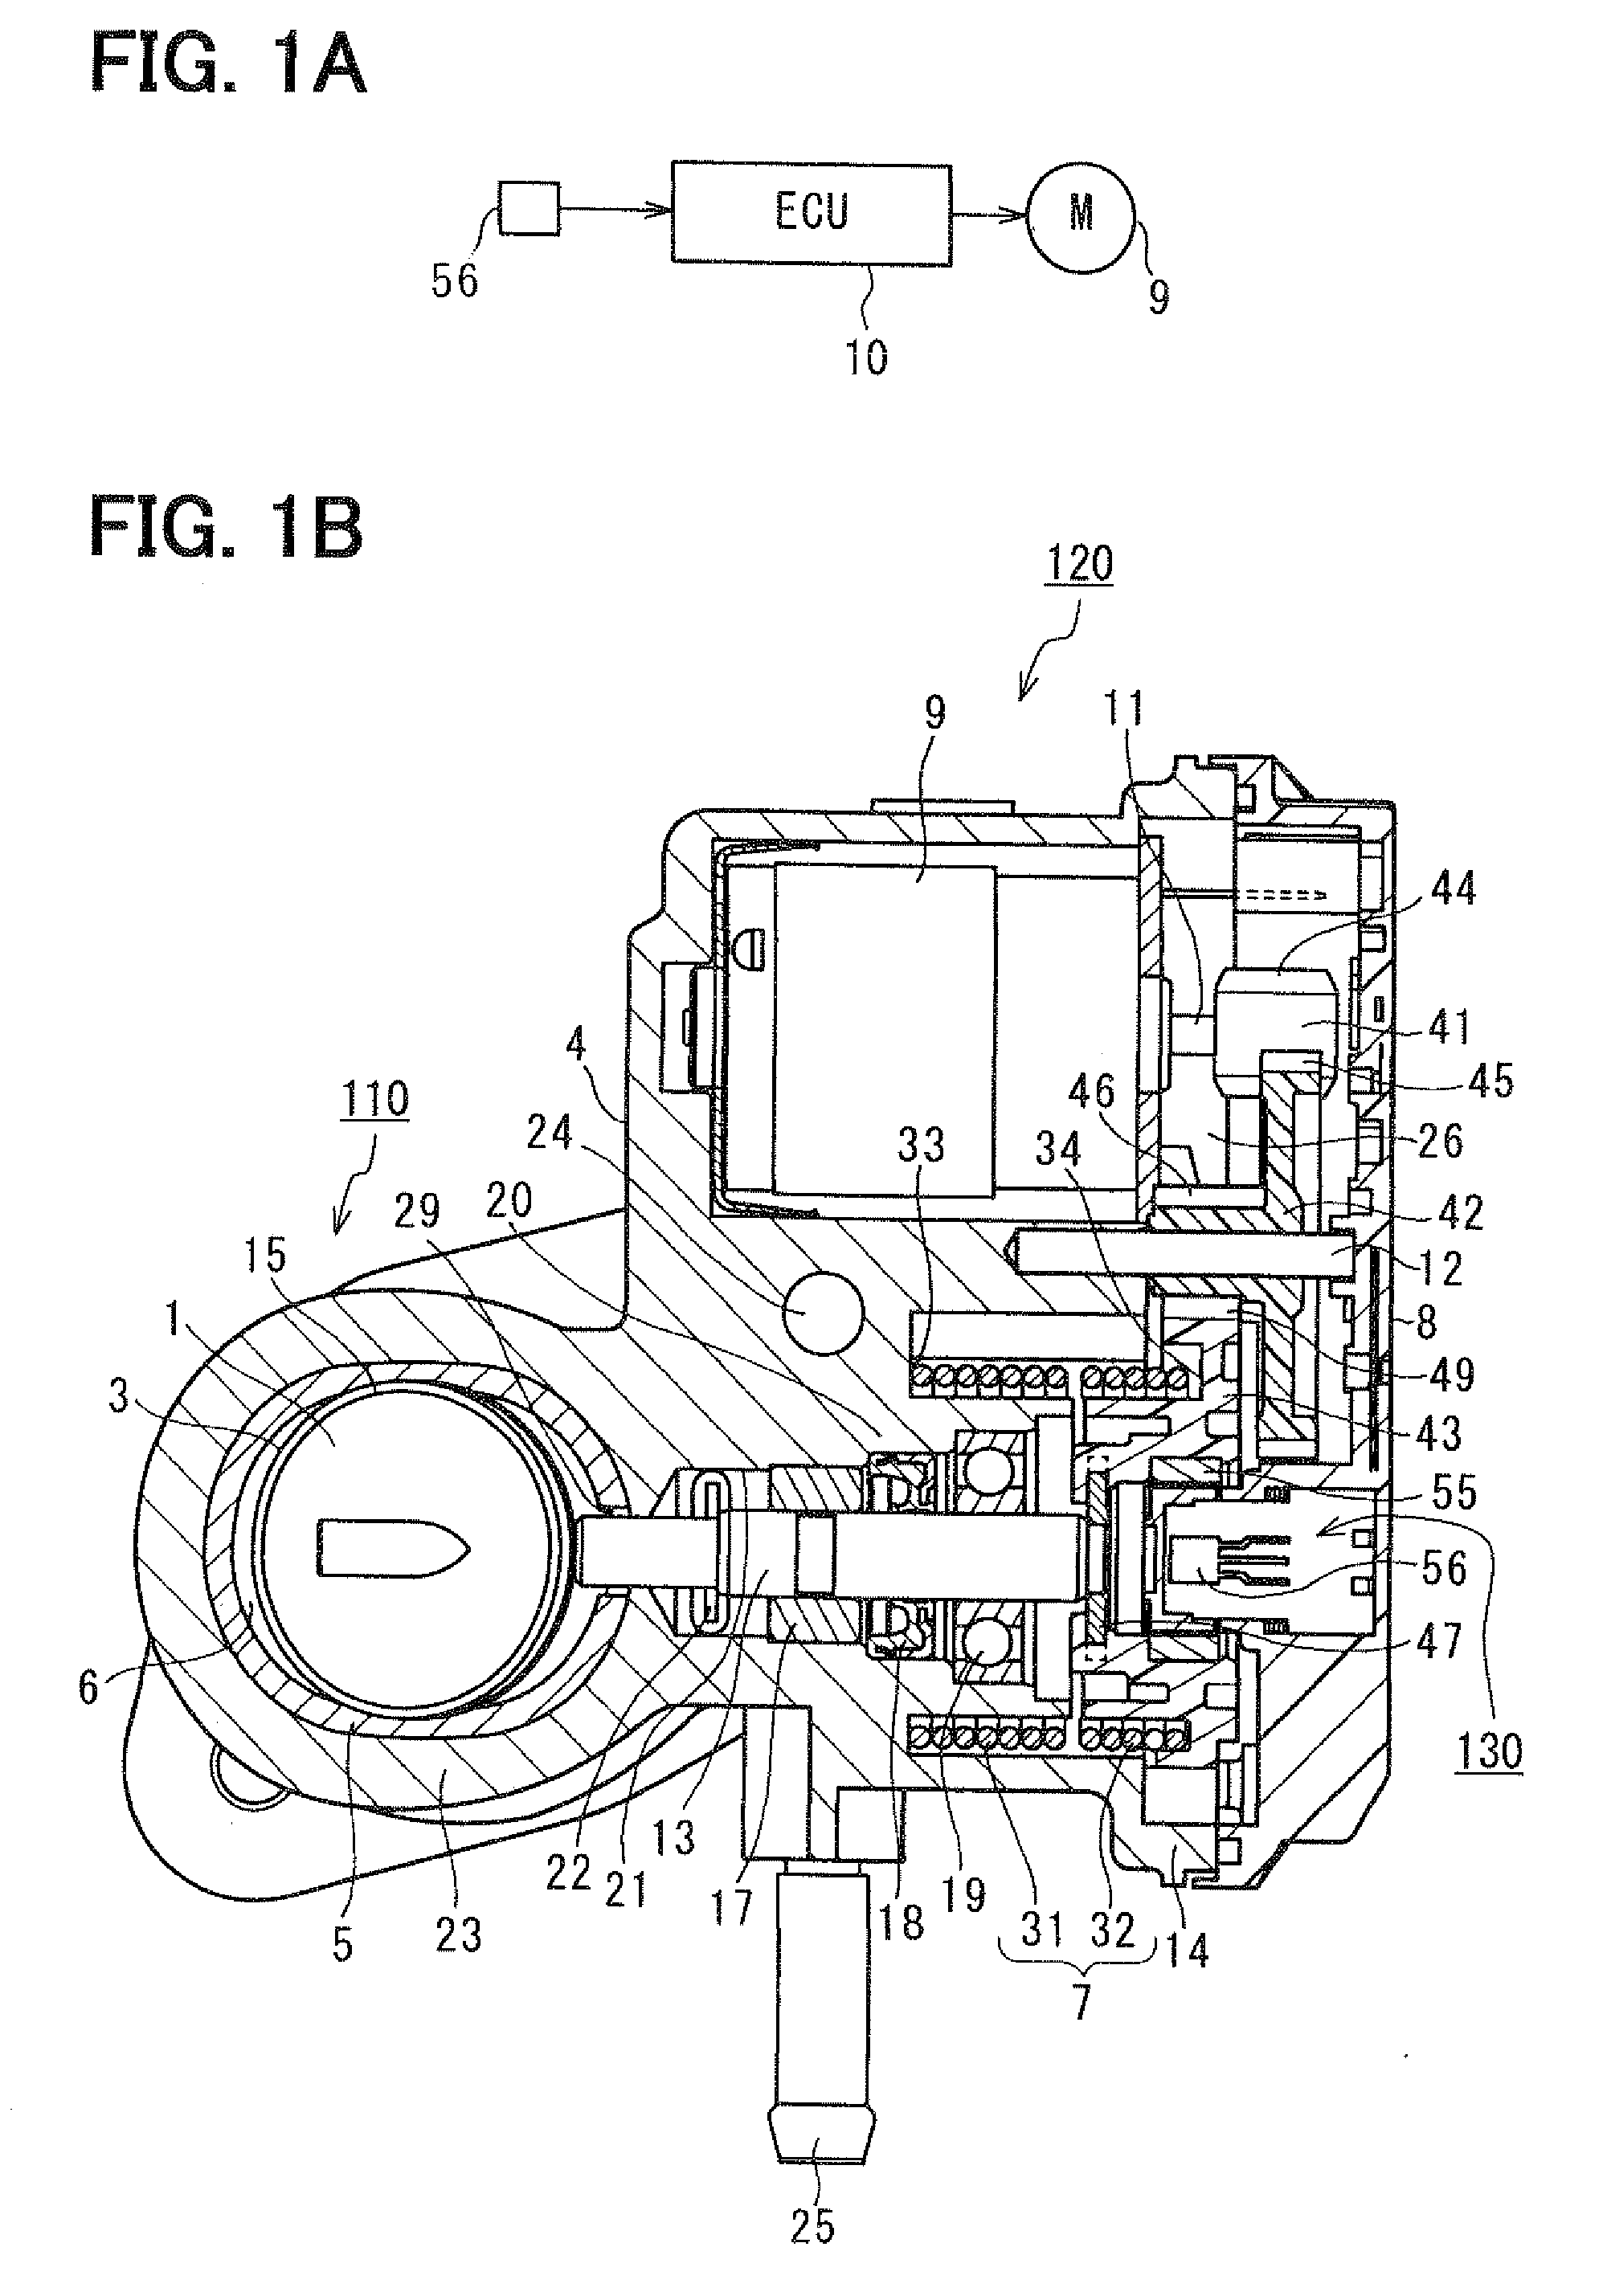 Valve opening and closing control apparatus